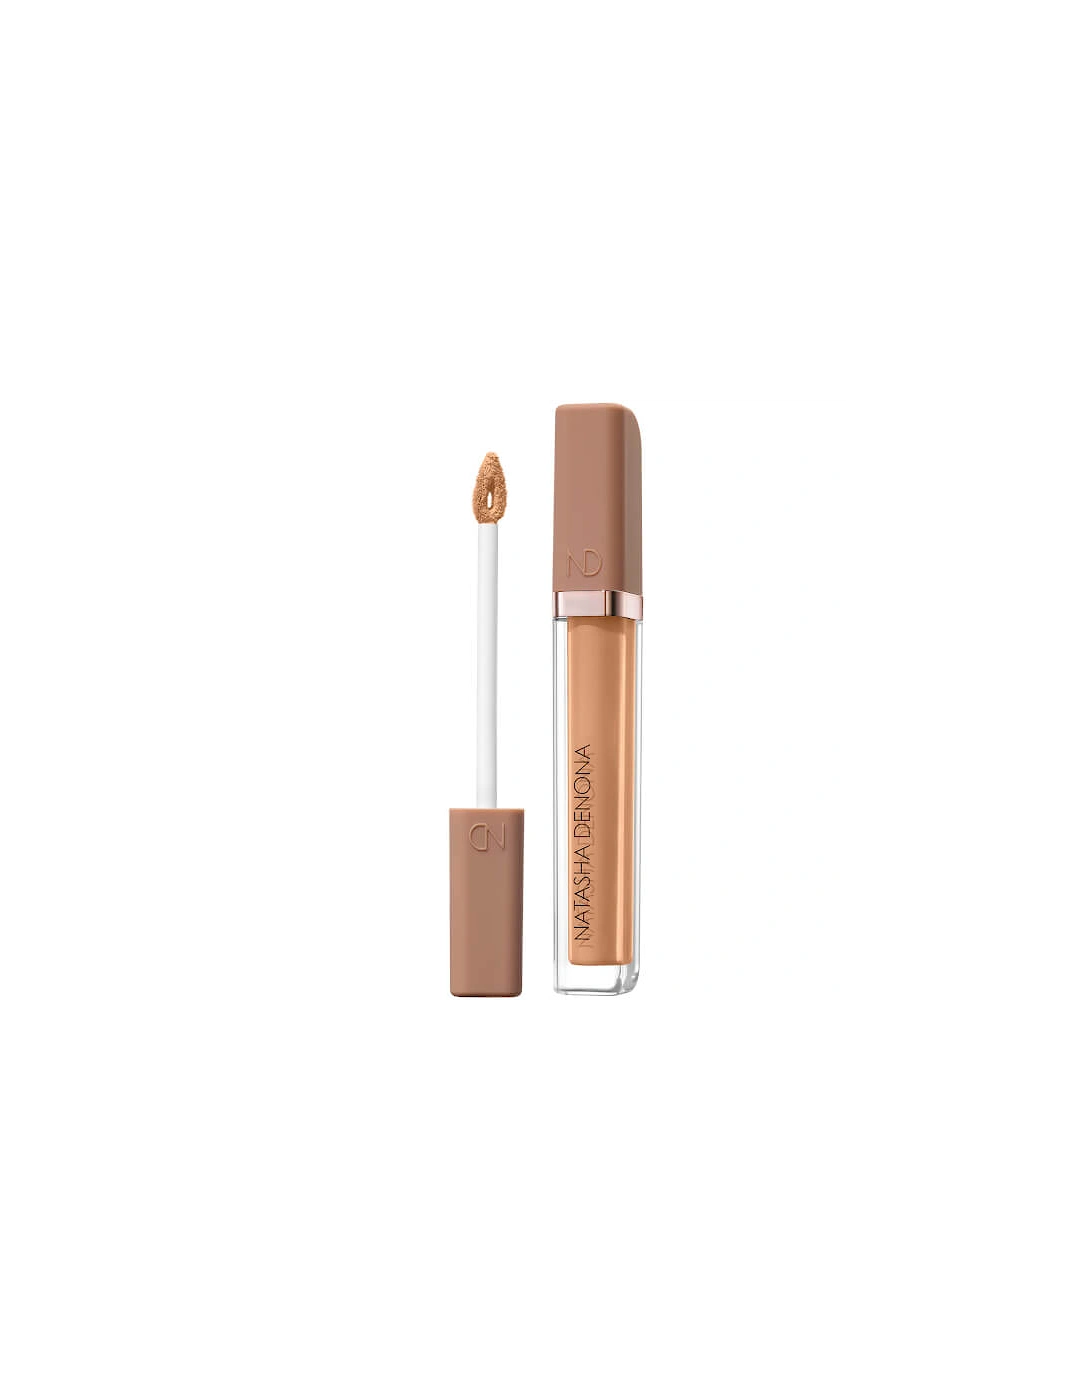 Hy-Glam Concealer - NP10, 2 of 1